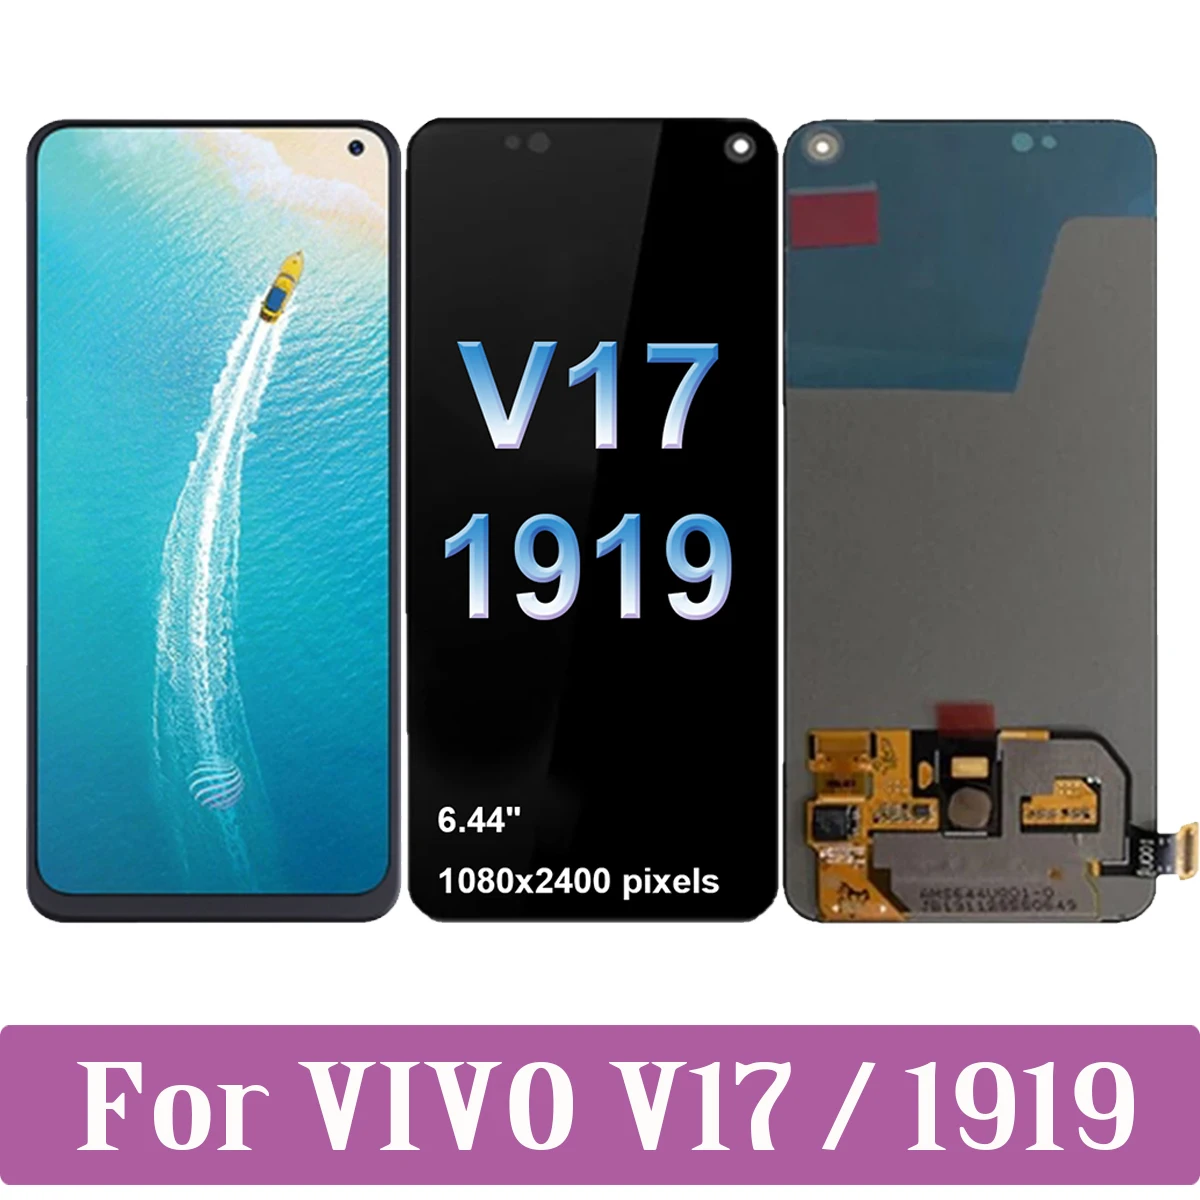 

6.44'' AMOLED Original For VIVO V17 1919 LCD Display Touch Screen Replacement Digitizer Assembly For VIVOV17 LCD